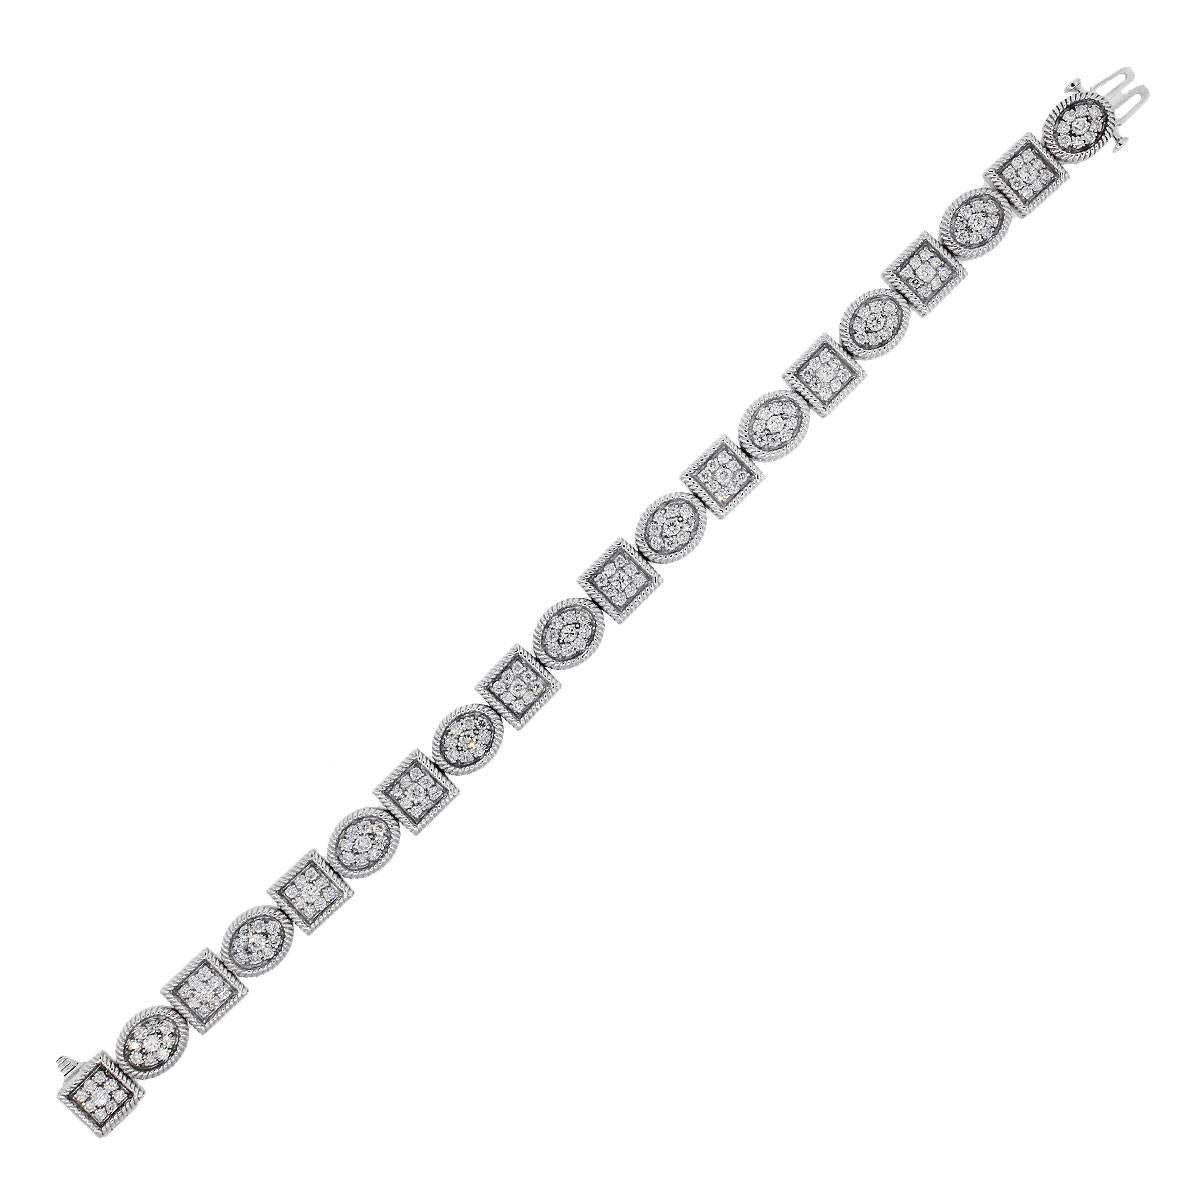 Material: 14k white gold
Diamond Details: Approximately 3.6ctw of round brilliant diamonds. Diamonds are G/H in color and SI in clarity.
Fastening: Tongue in box with double safety latch
Measurements: Will fit a 7.5″ wrist
Item Weight: 28.4g